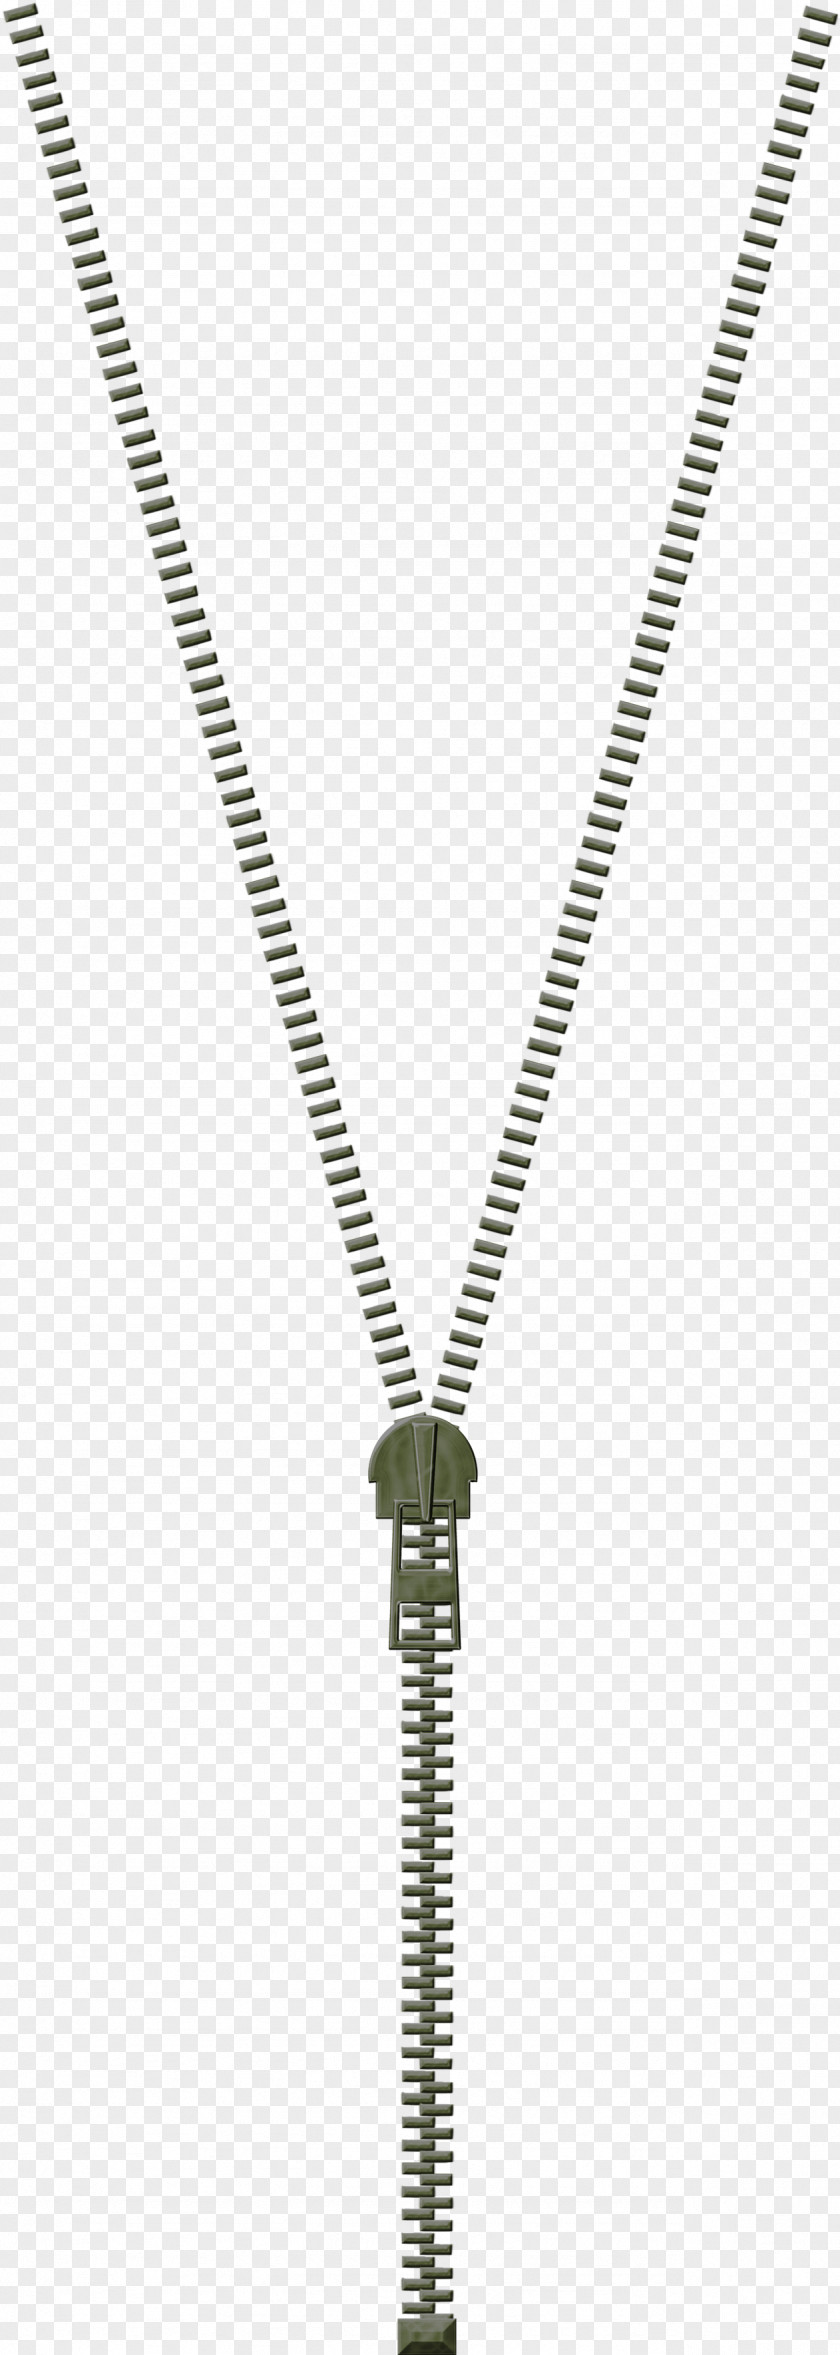 Jewellery Chain Metal Background PNG